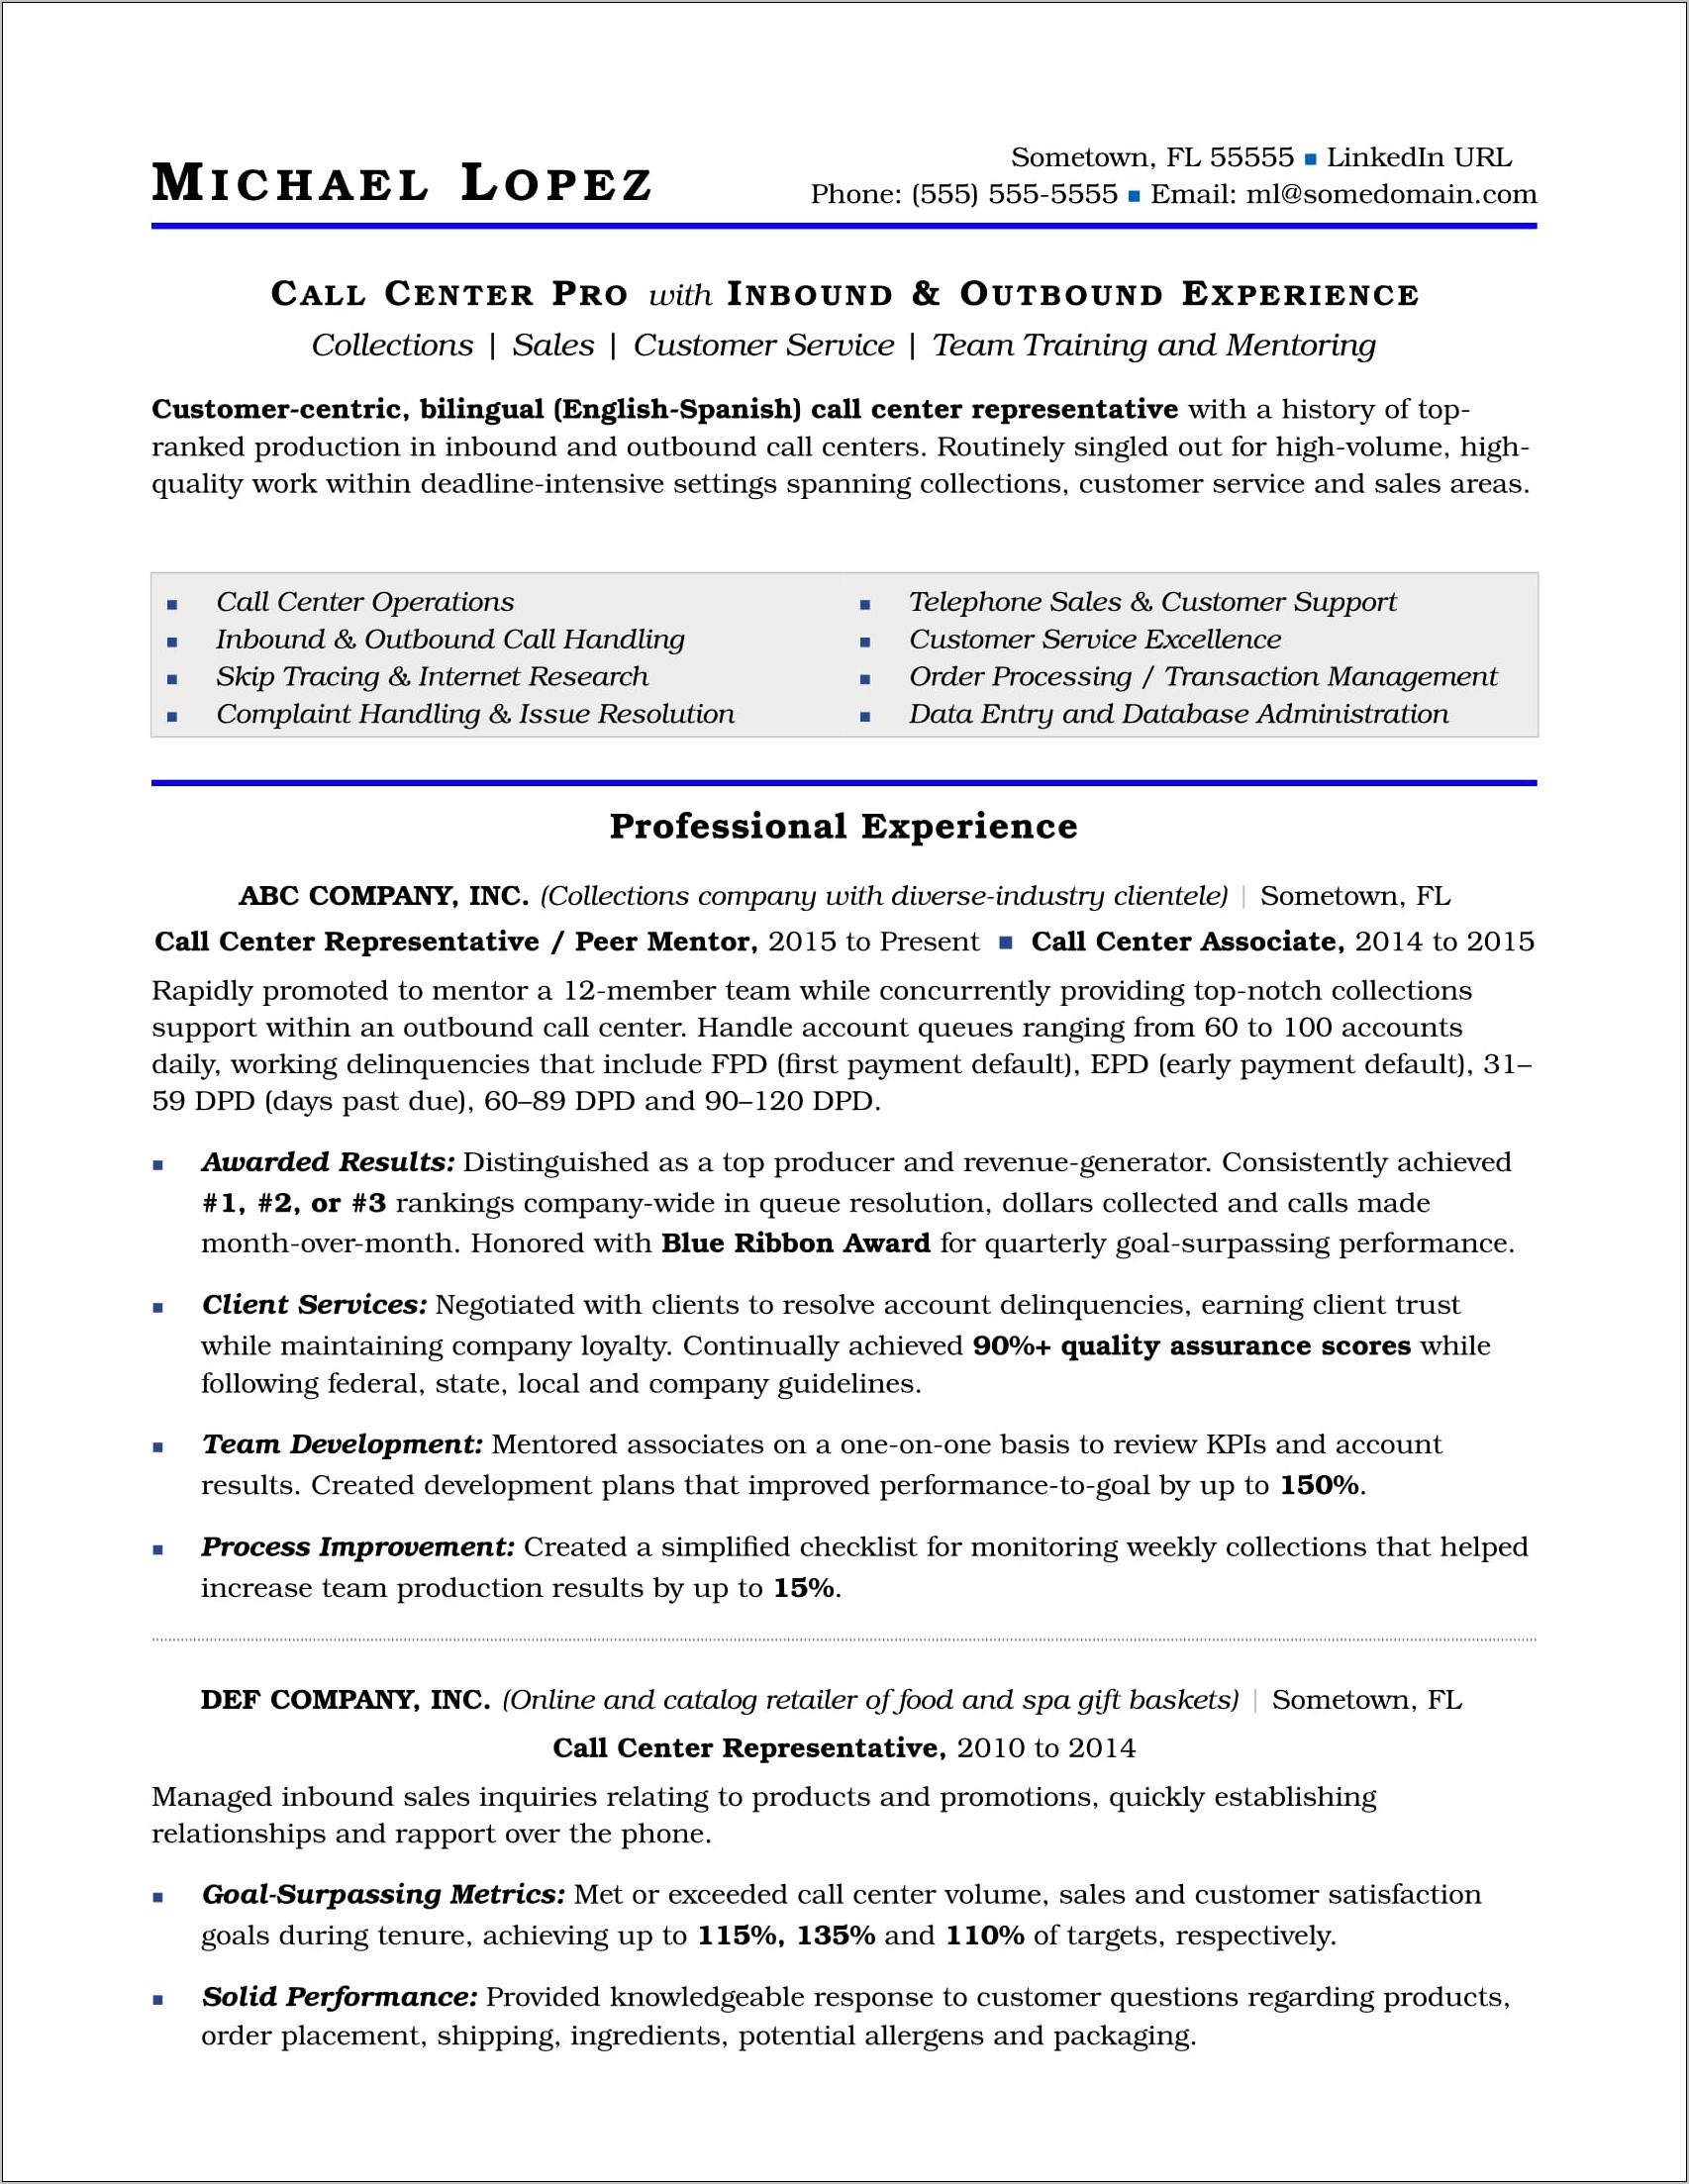 Resume Format Two Jobs In Same Company